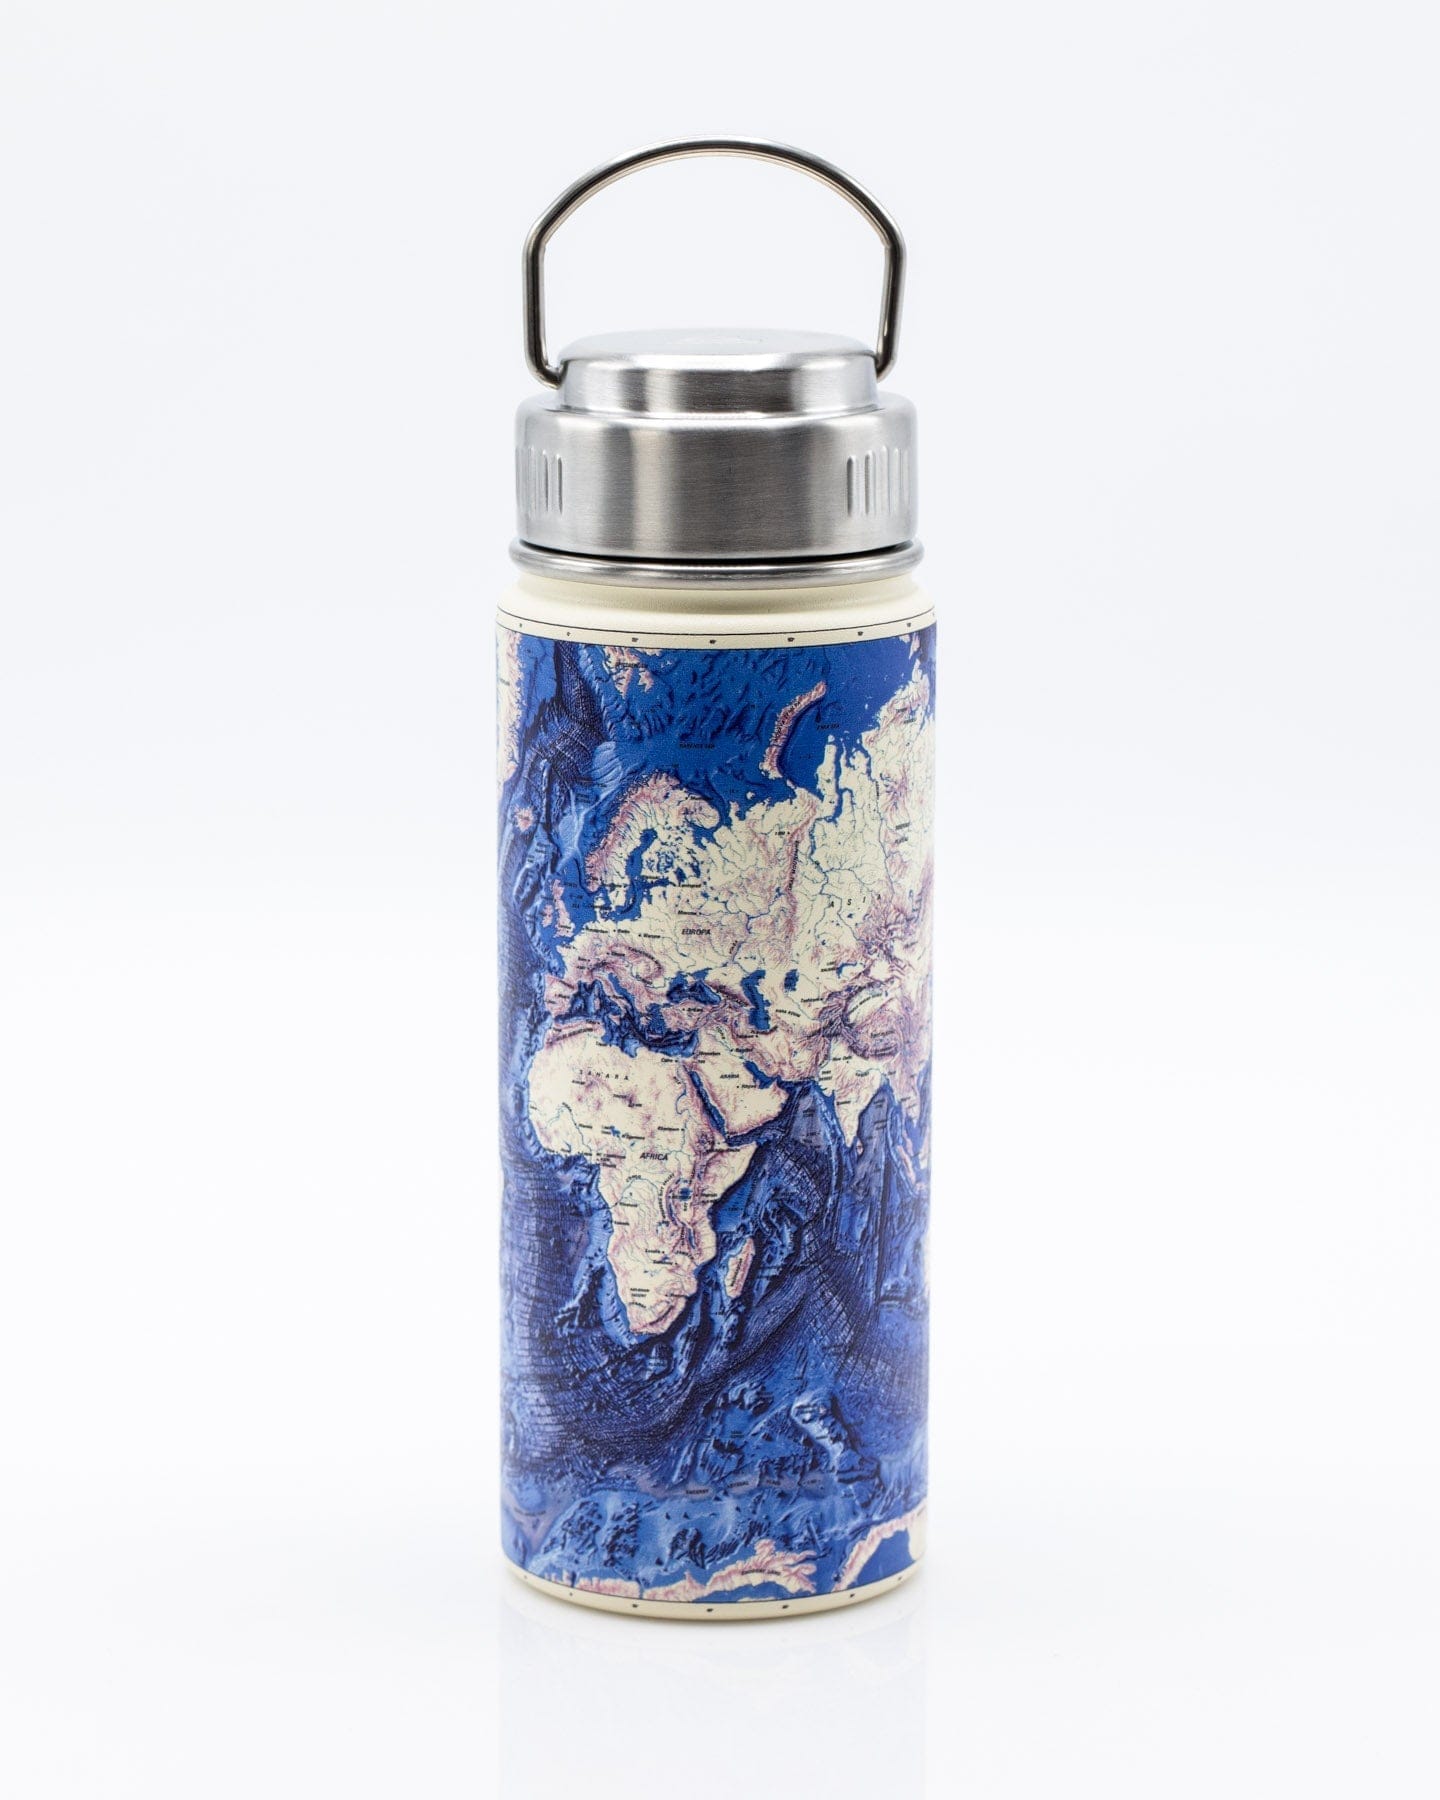 Insect Steel Vacuum Flask / Insulated Travel Mug | Cognitive Surplus